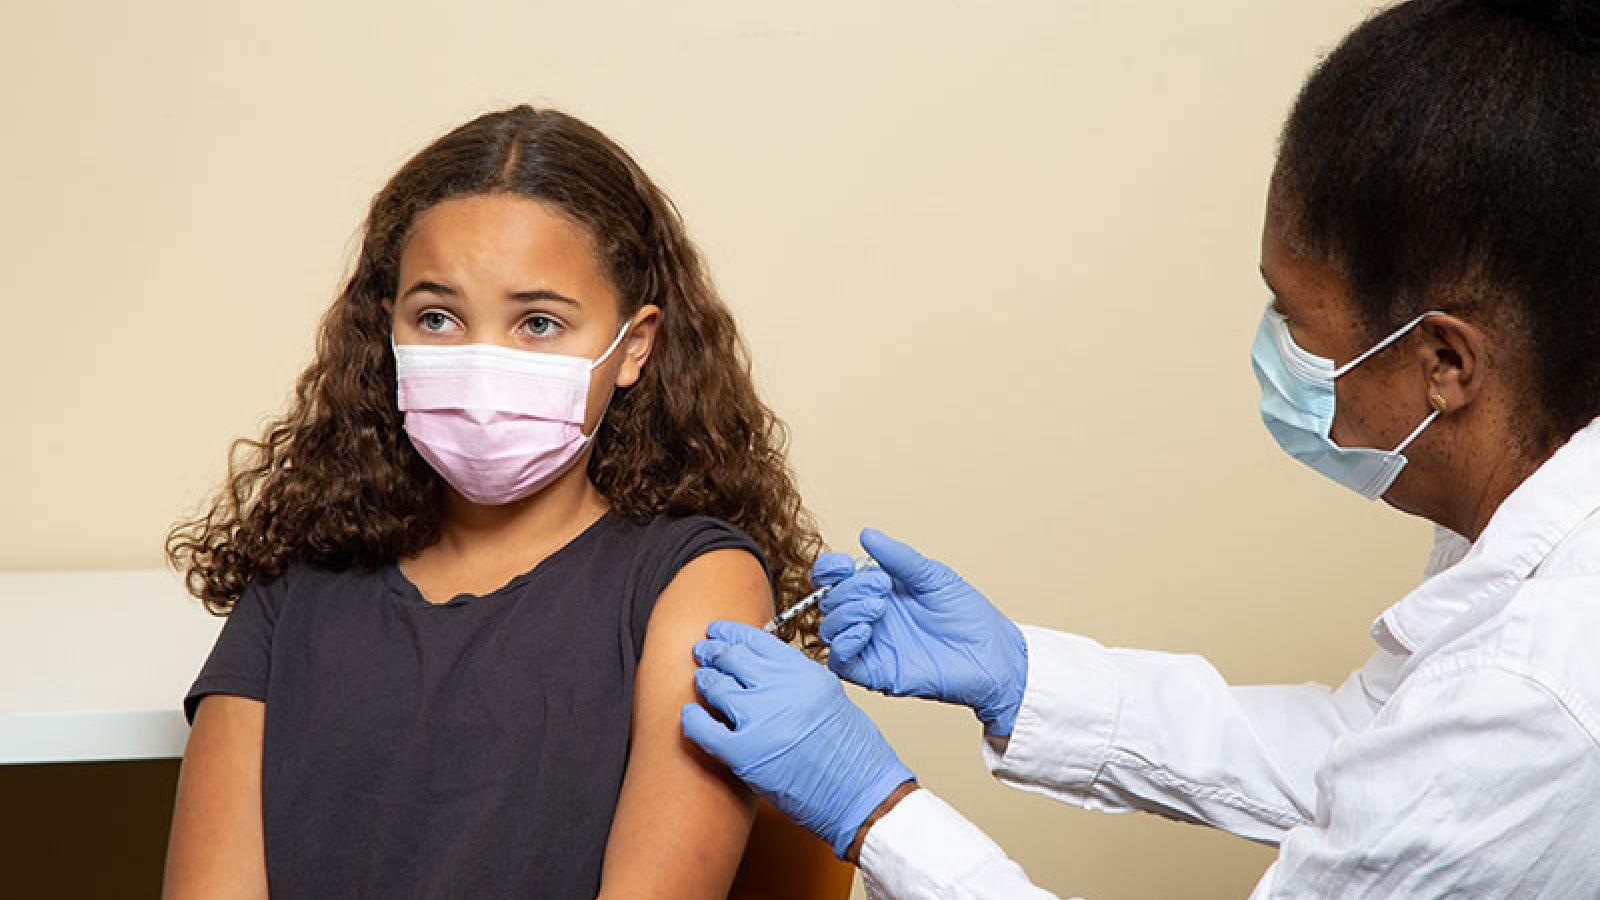 Kids and COVID-19 Vaccines: What Parents Need to Know